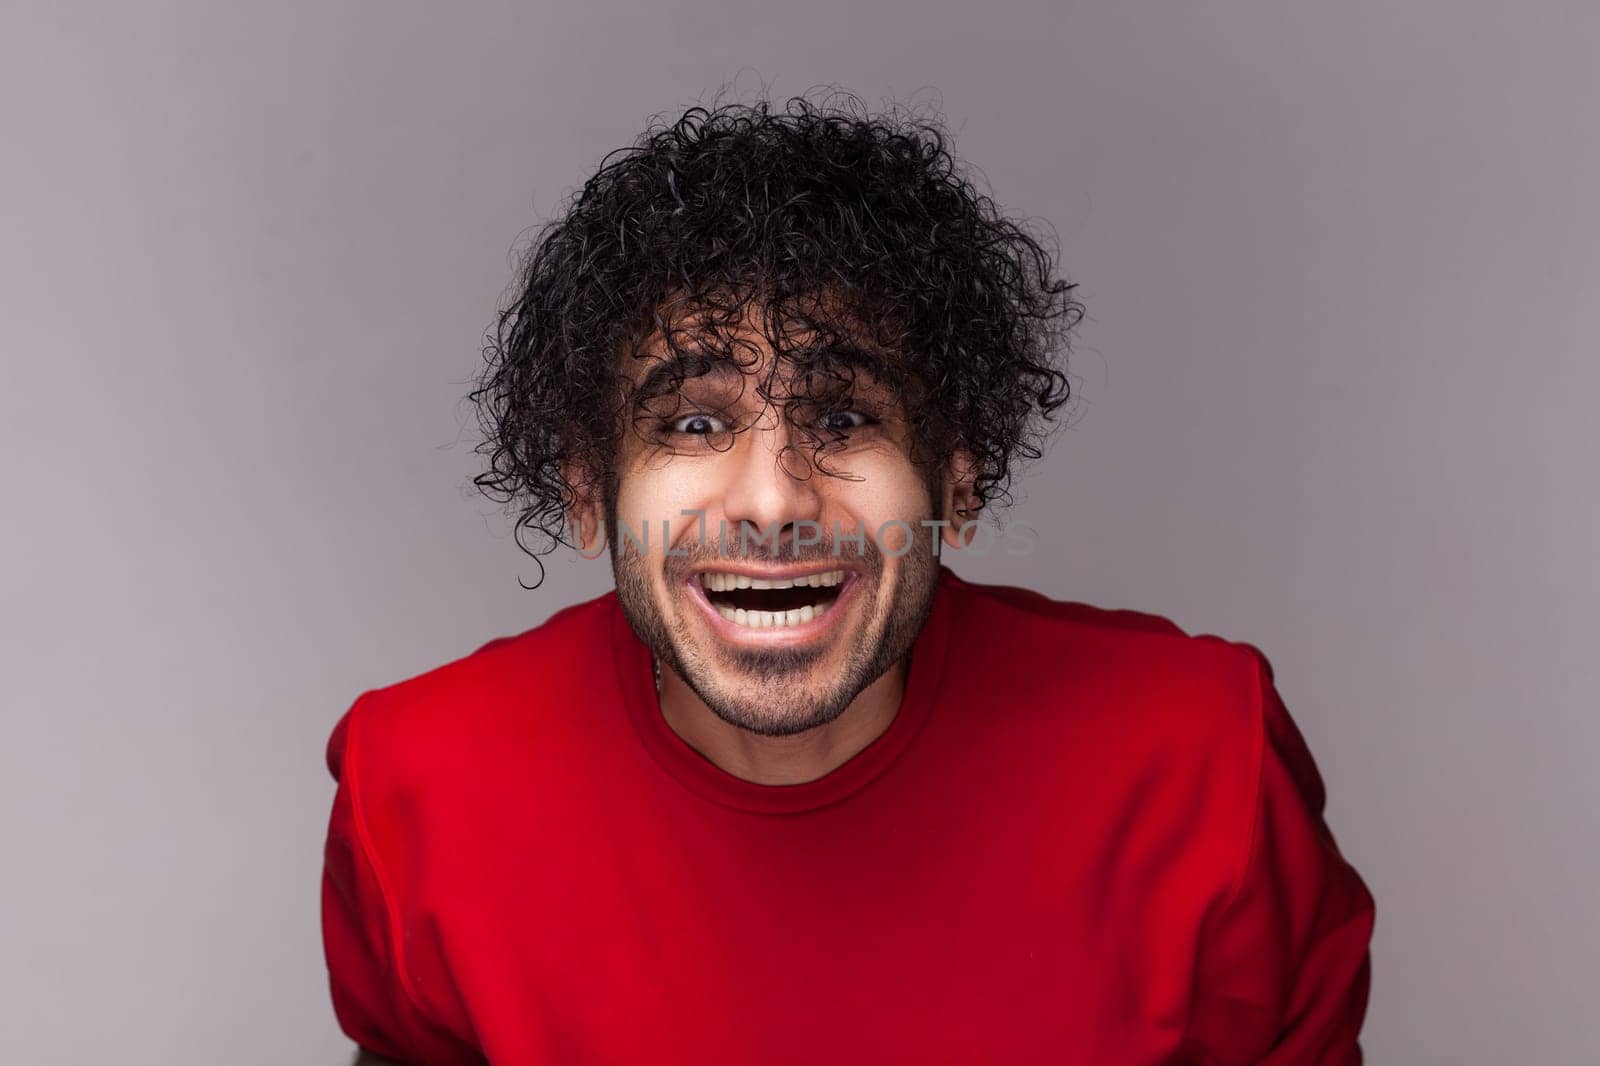 Portrait of amazed happy positive bearded man with curly hair, looking at camera and laughing, sees at his funny hairstyle, wearing red jumper. Indoor studio shot isolated on gray background.